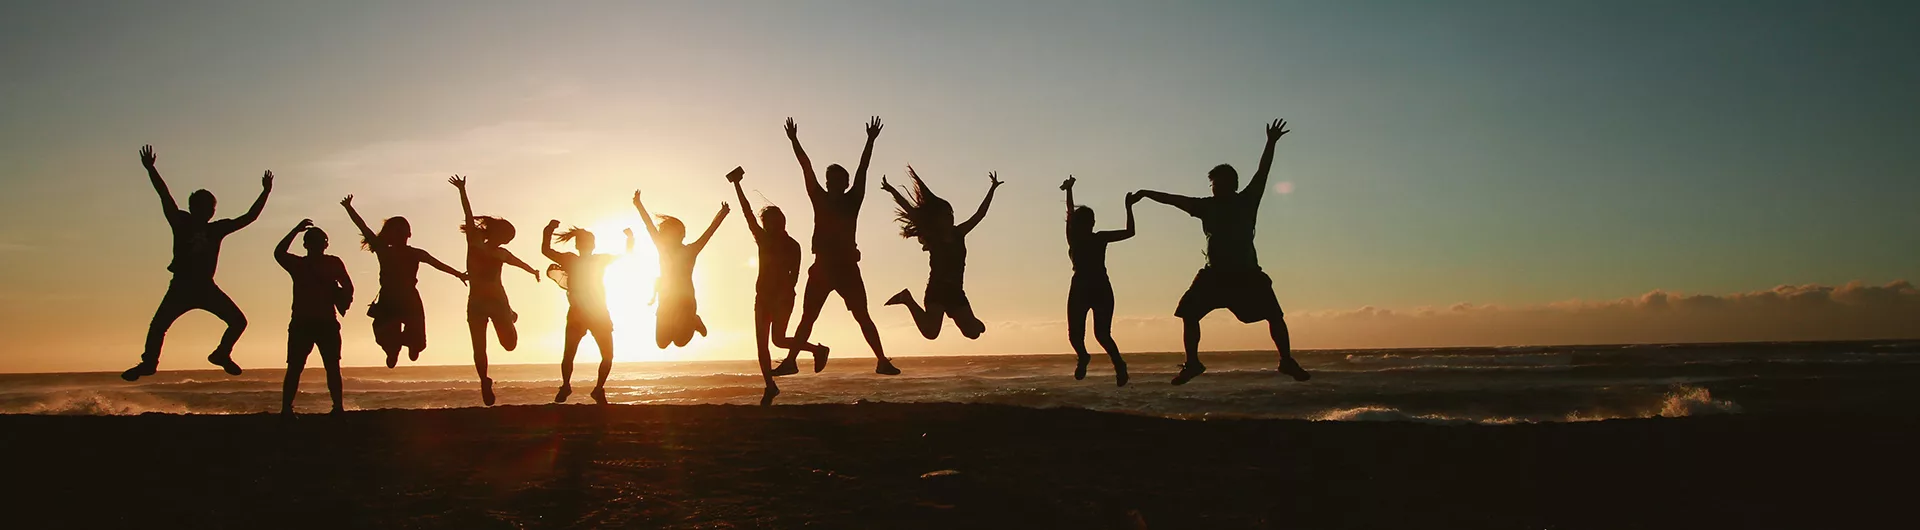 people jumping backlit by a sunset